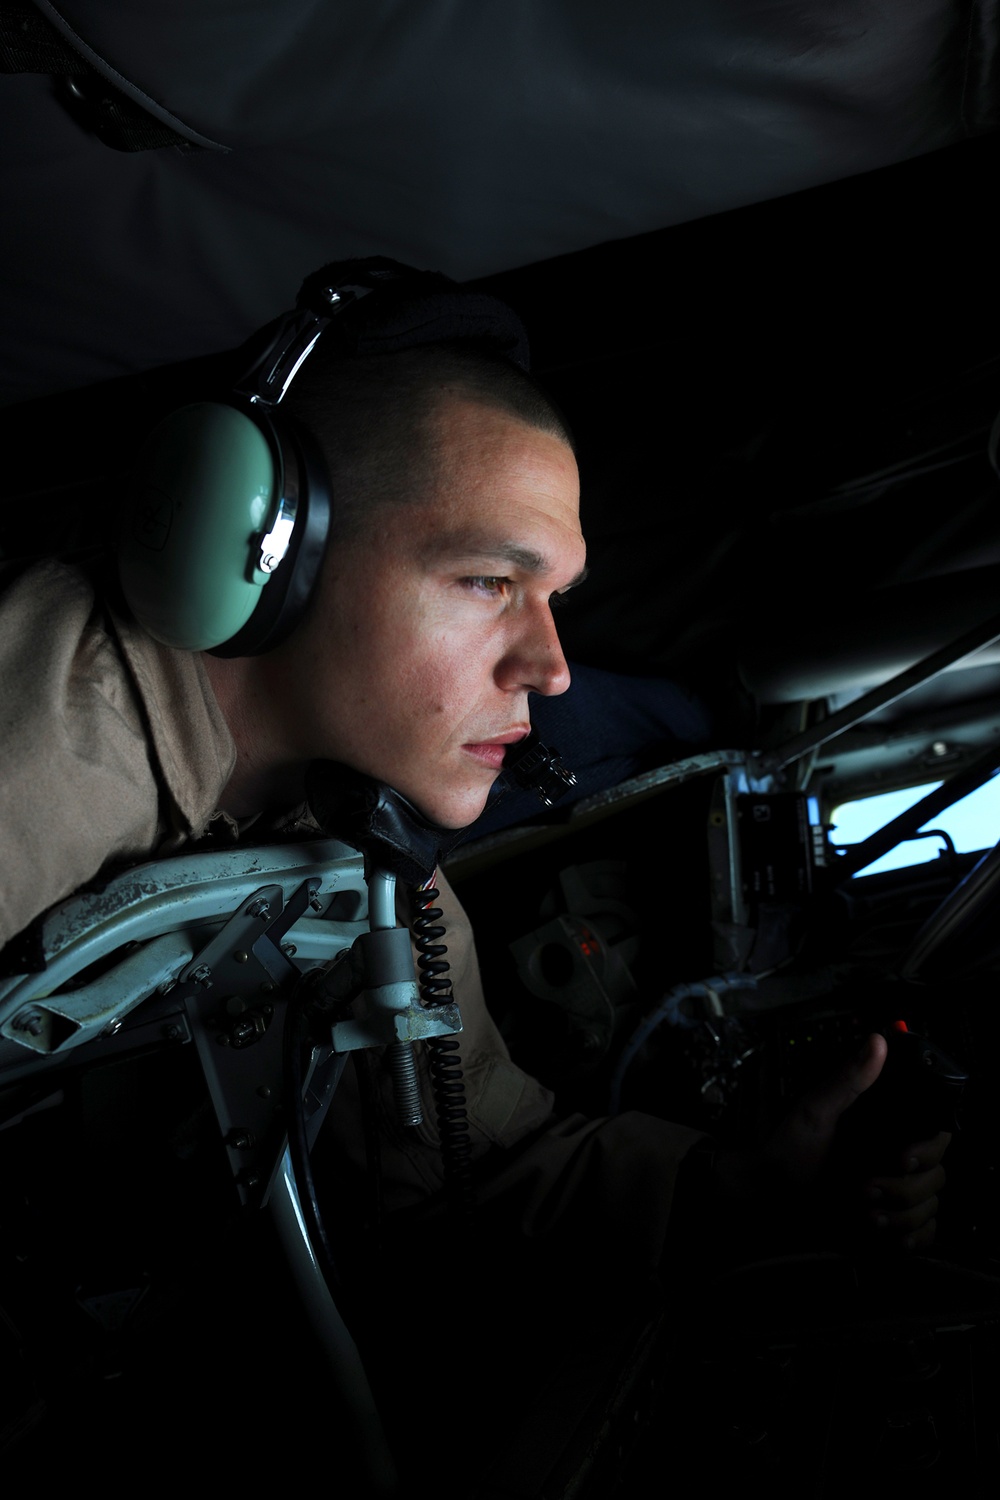 Fairchild Airman Delivers Fuel to OEF Fight As Deployed Boom Operator